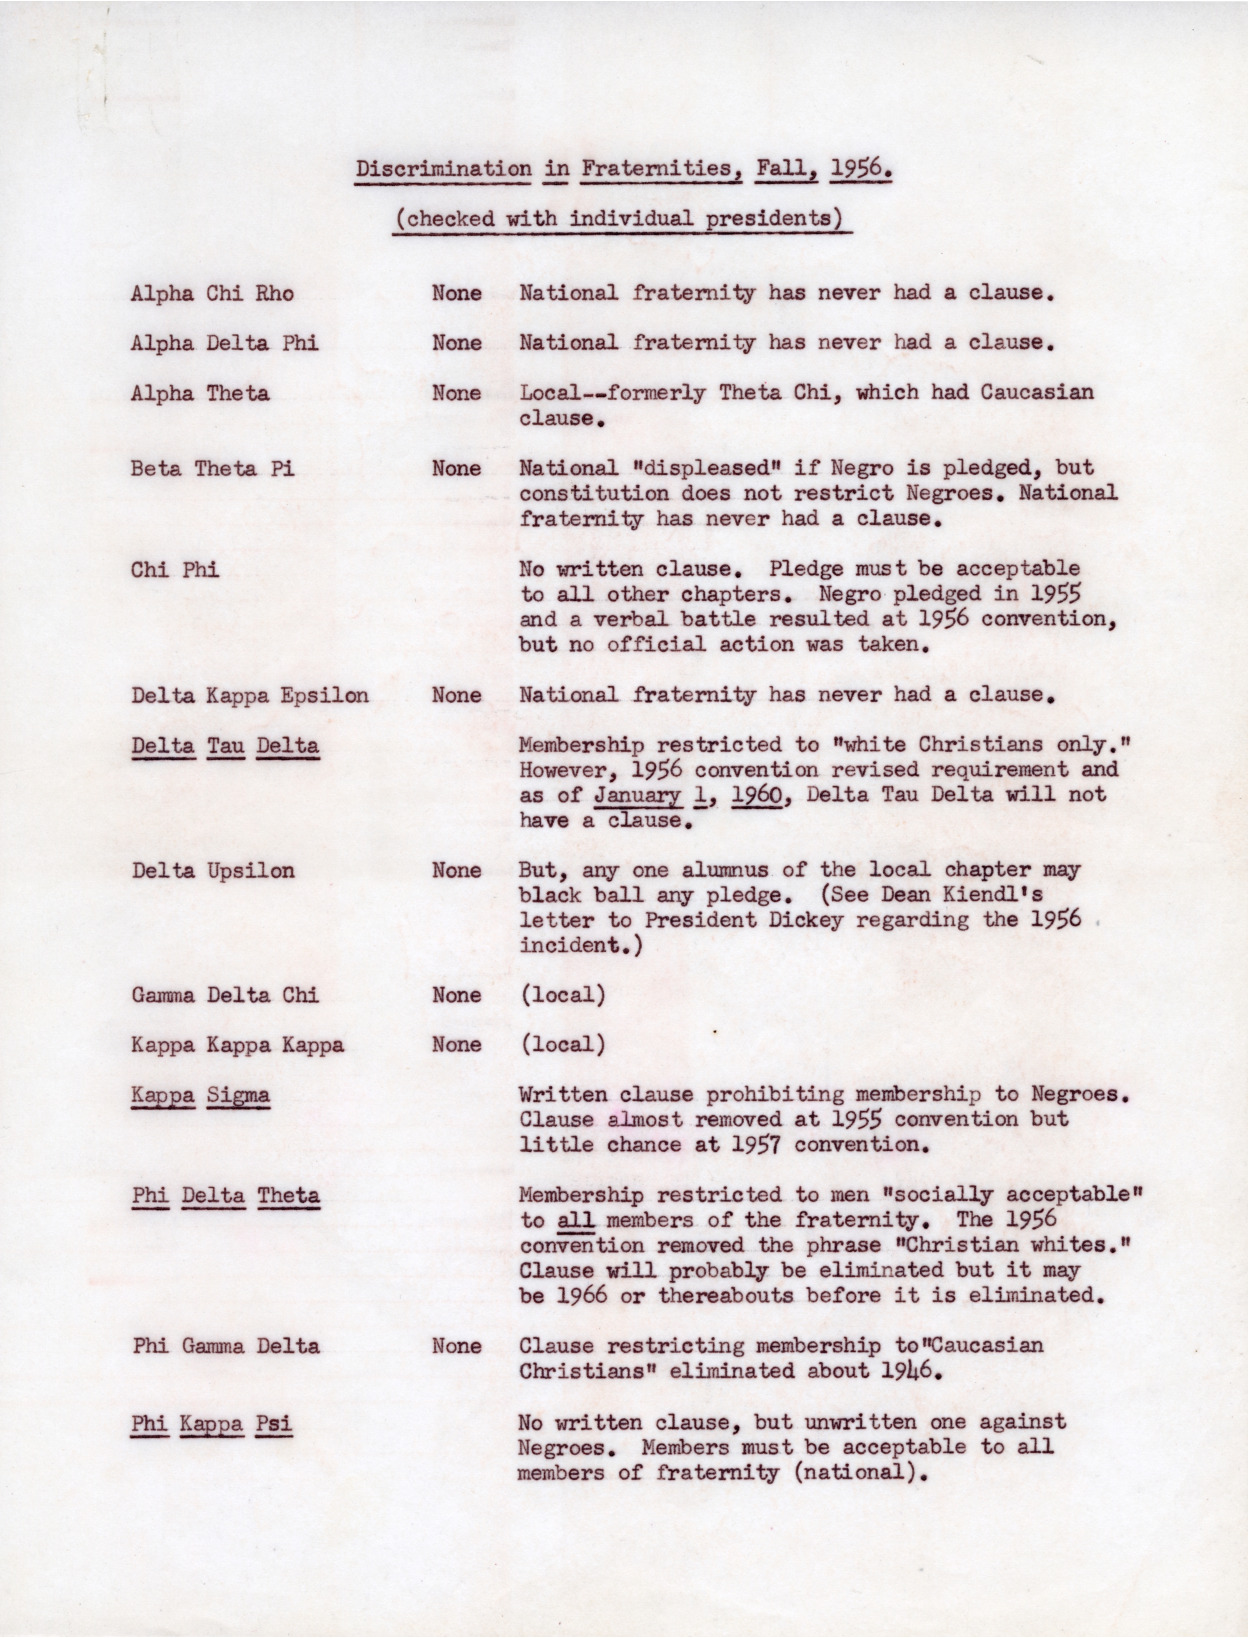 Discrimination in Fraternities, Fall, 1956